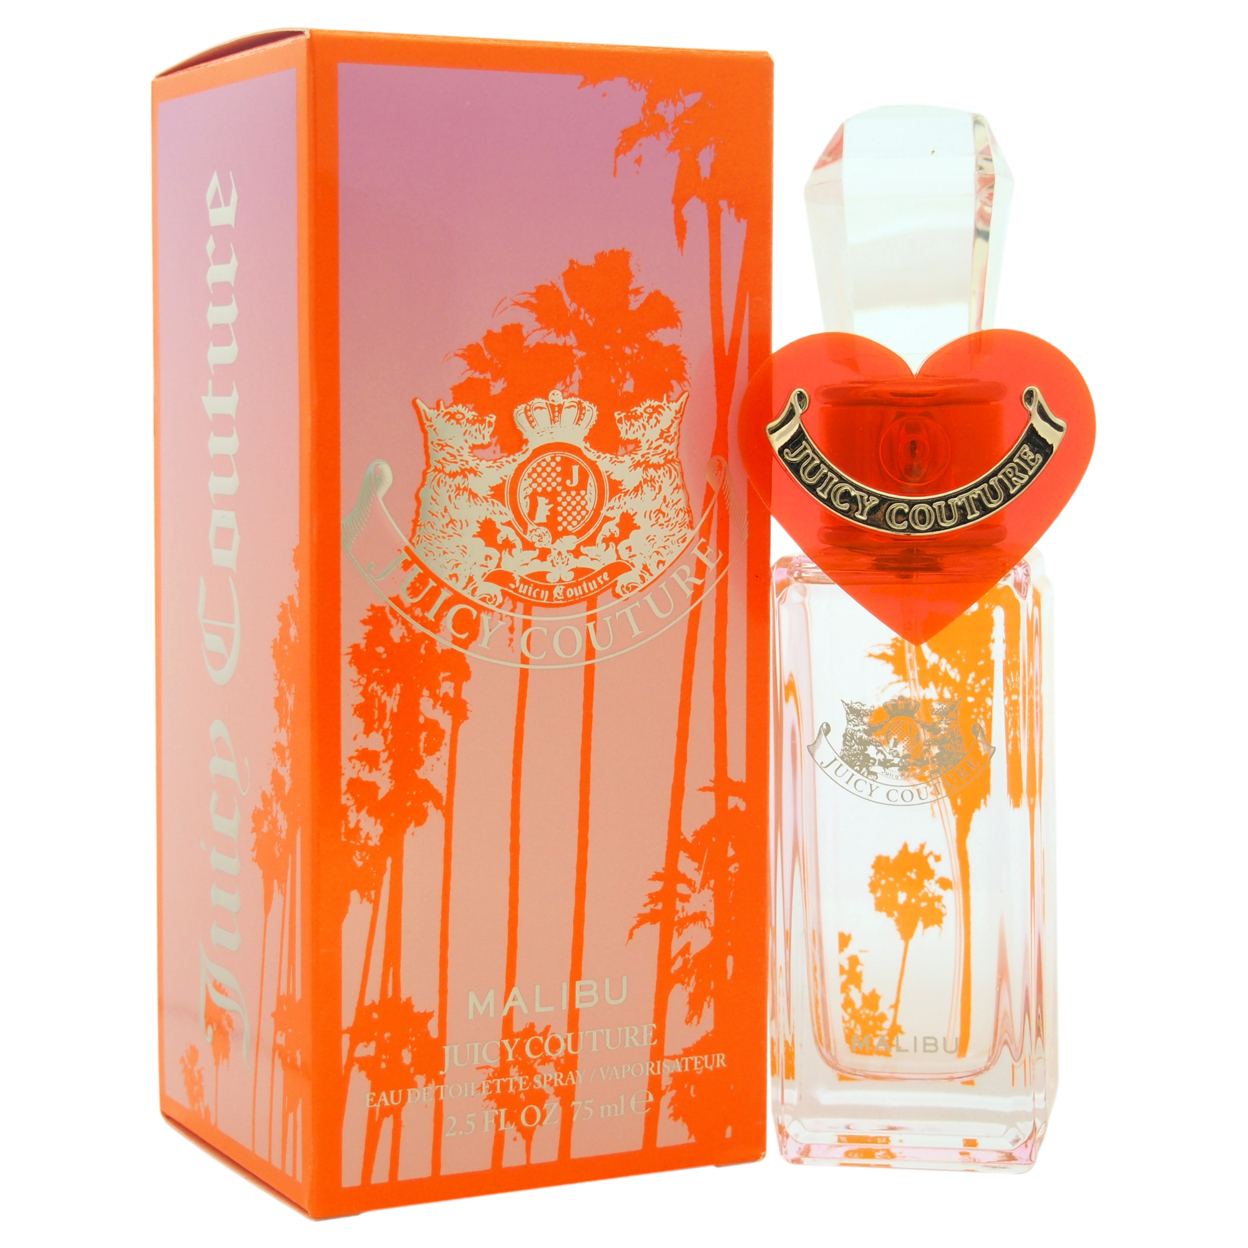 Buy Juicy Couture Malibu by Juicy Couture for Women - 2.5 oz EDT Spray ...